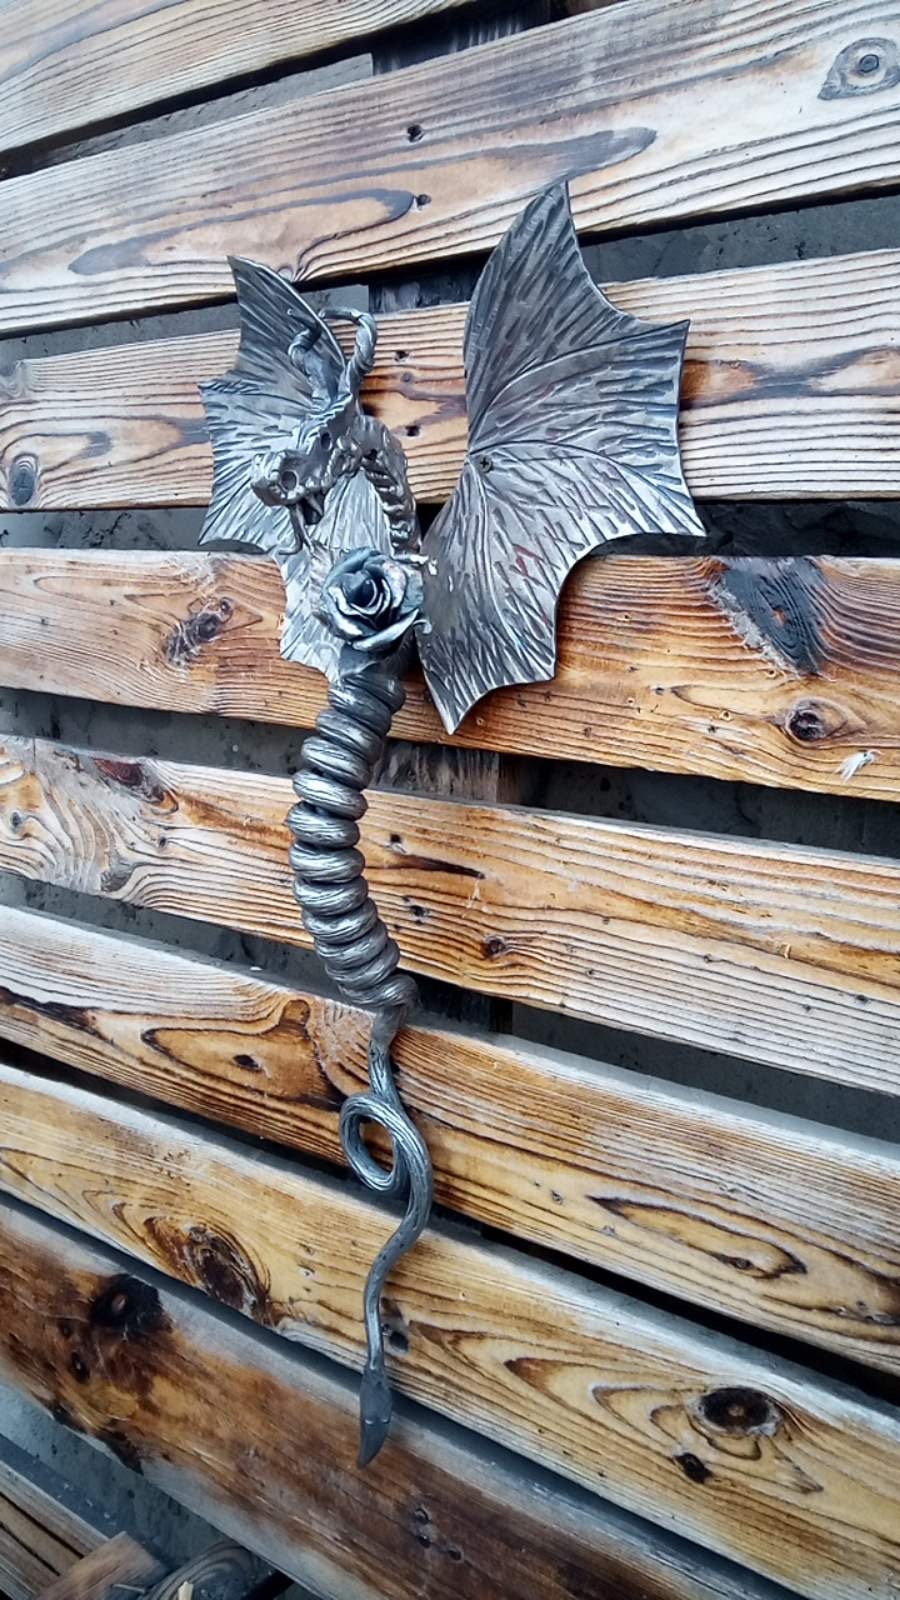 Door handle, dragon, rose, medieval, Christmas, birthday, anniversary, ancient, viking, cottage, vintage, castle, iron gift,iron rose,flower